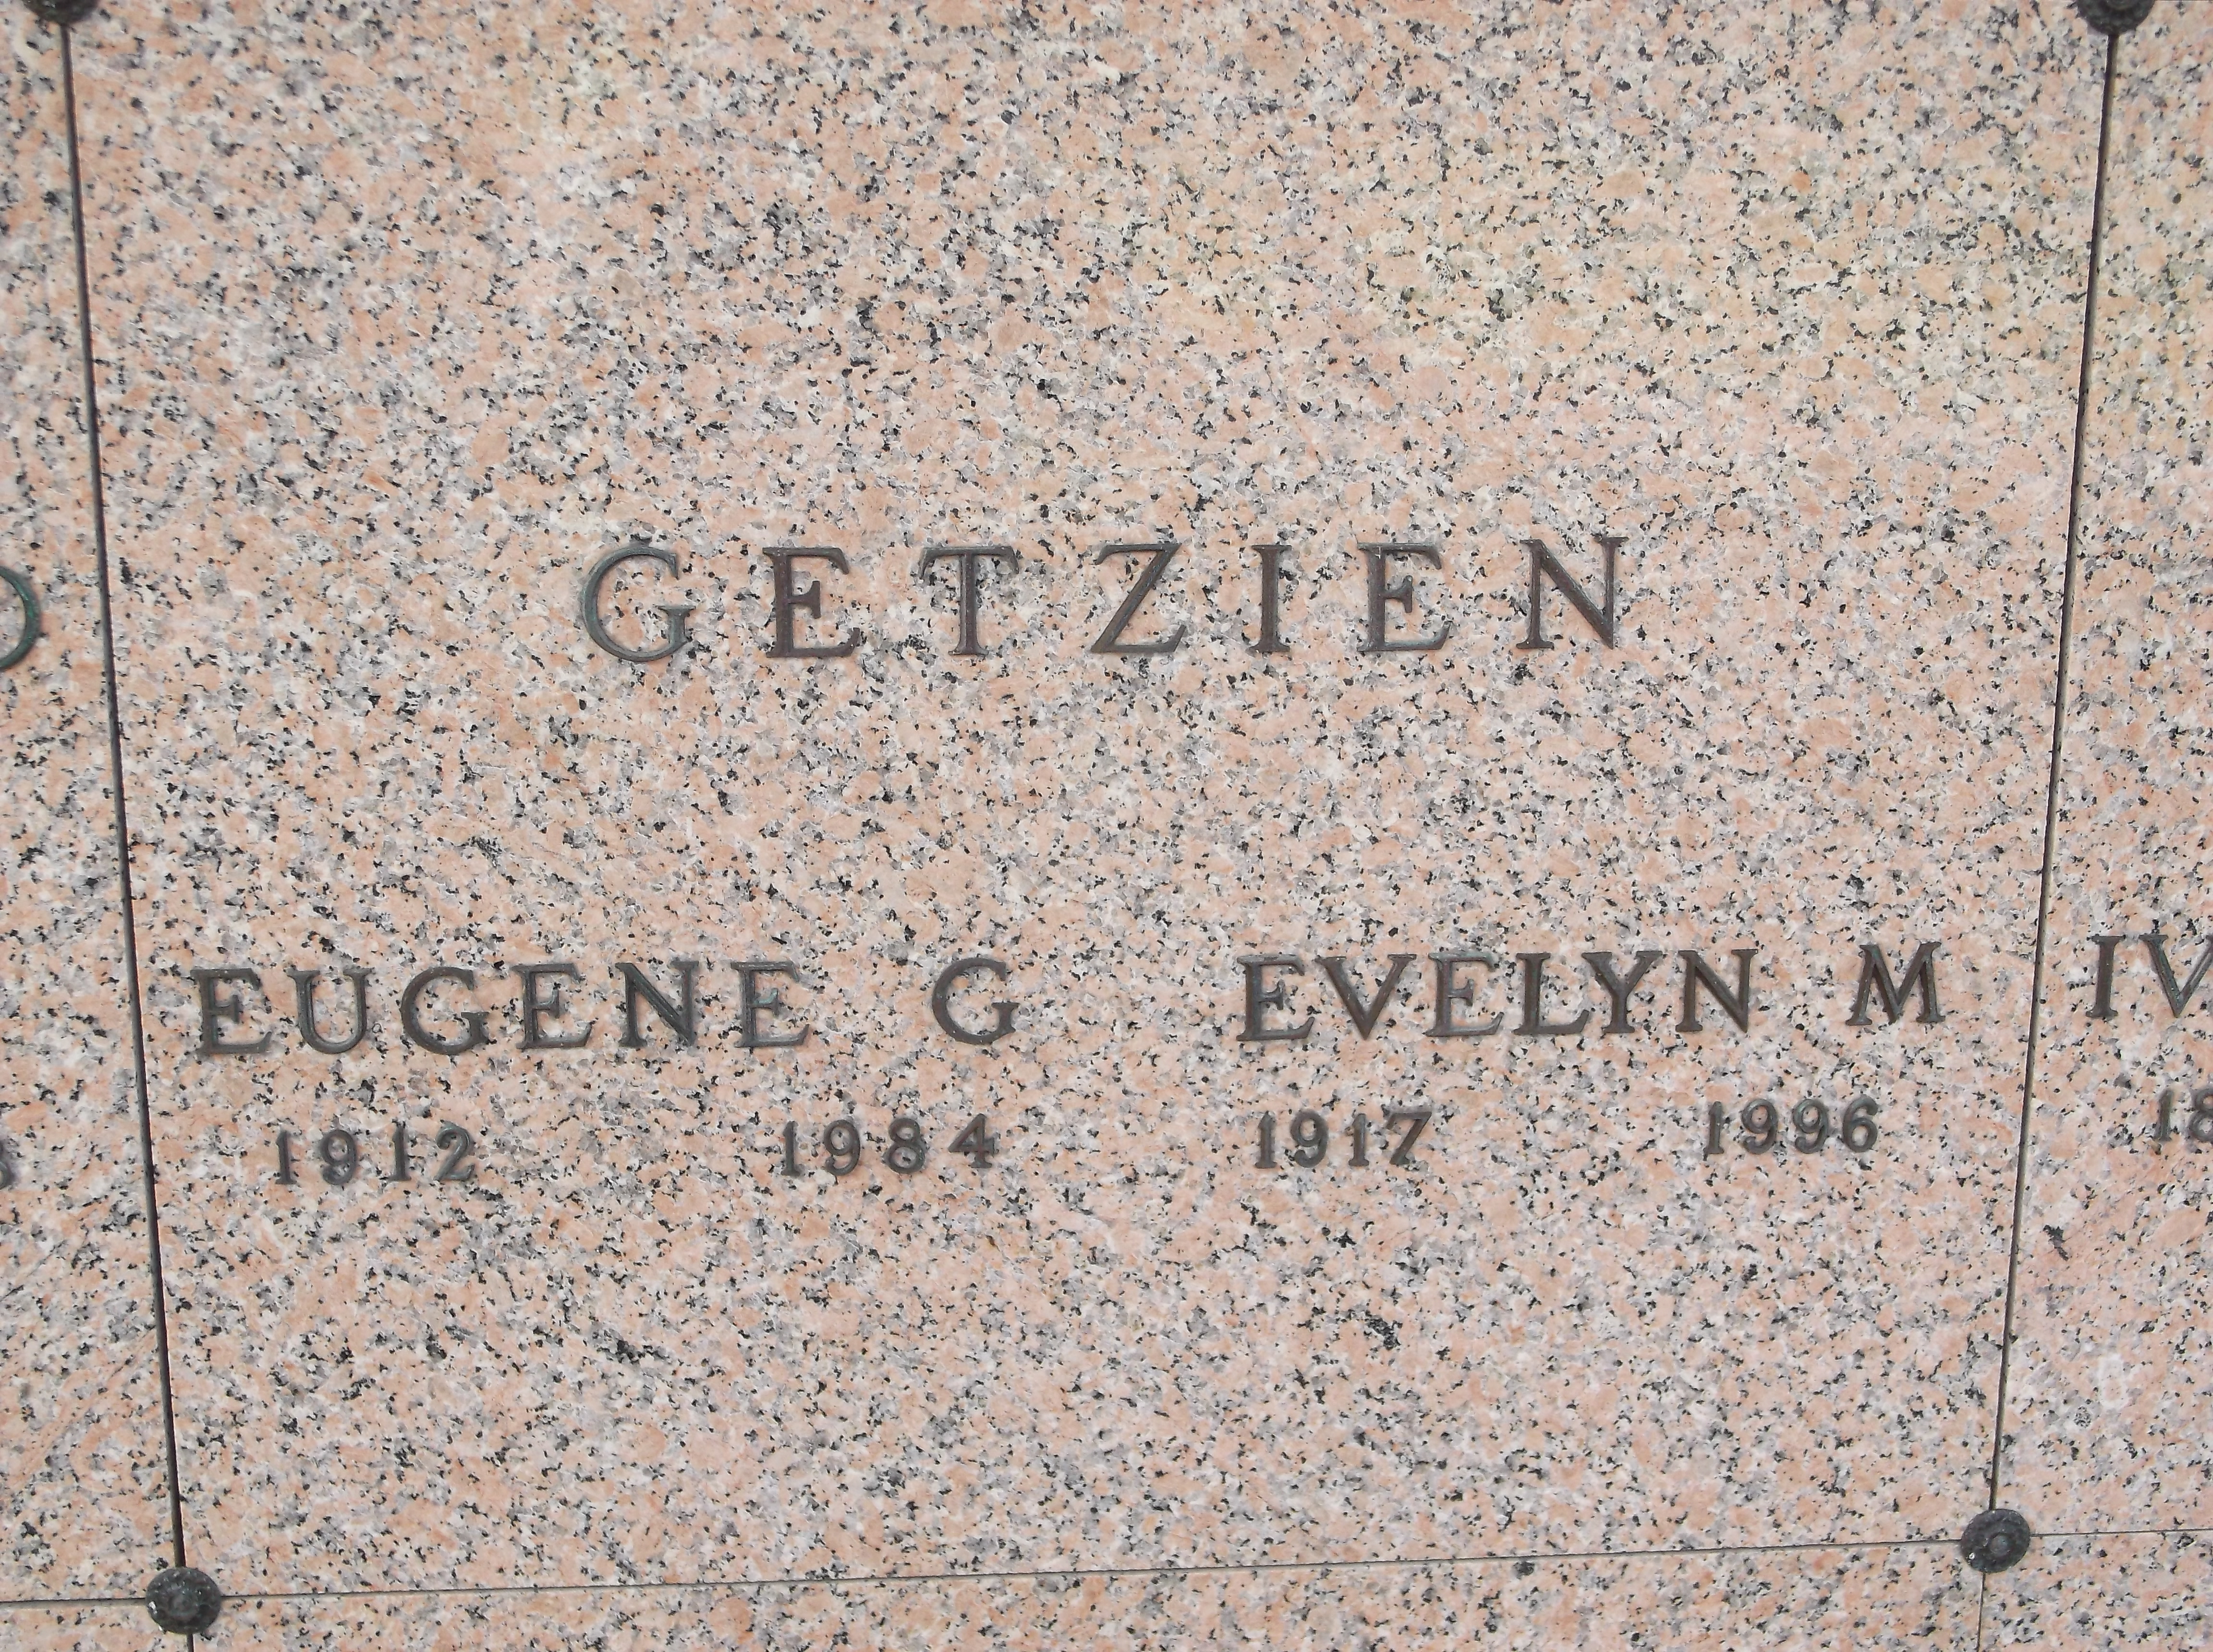 Evelyn M Getzien